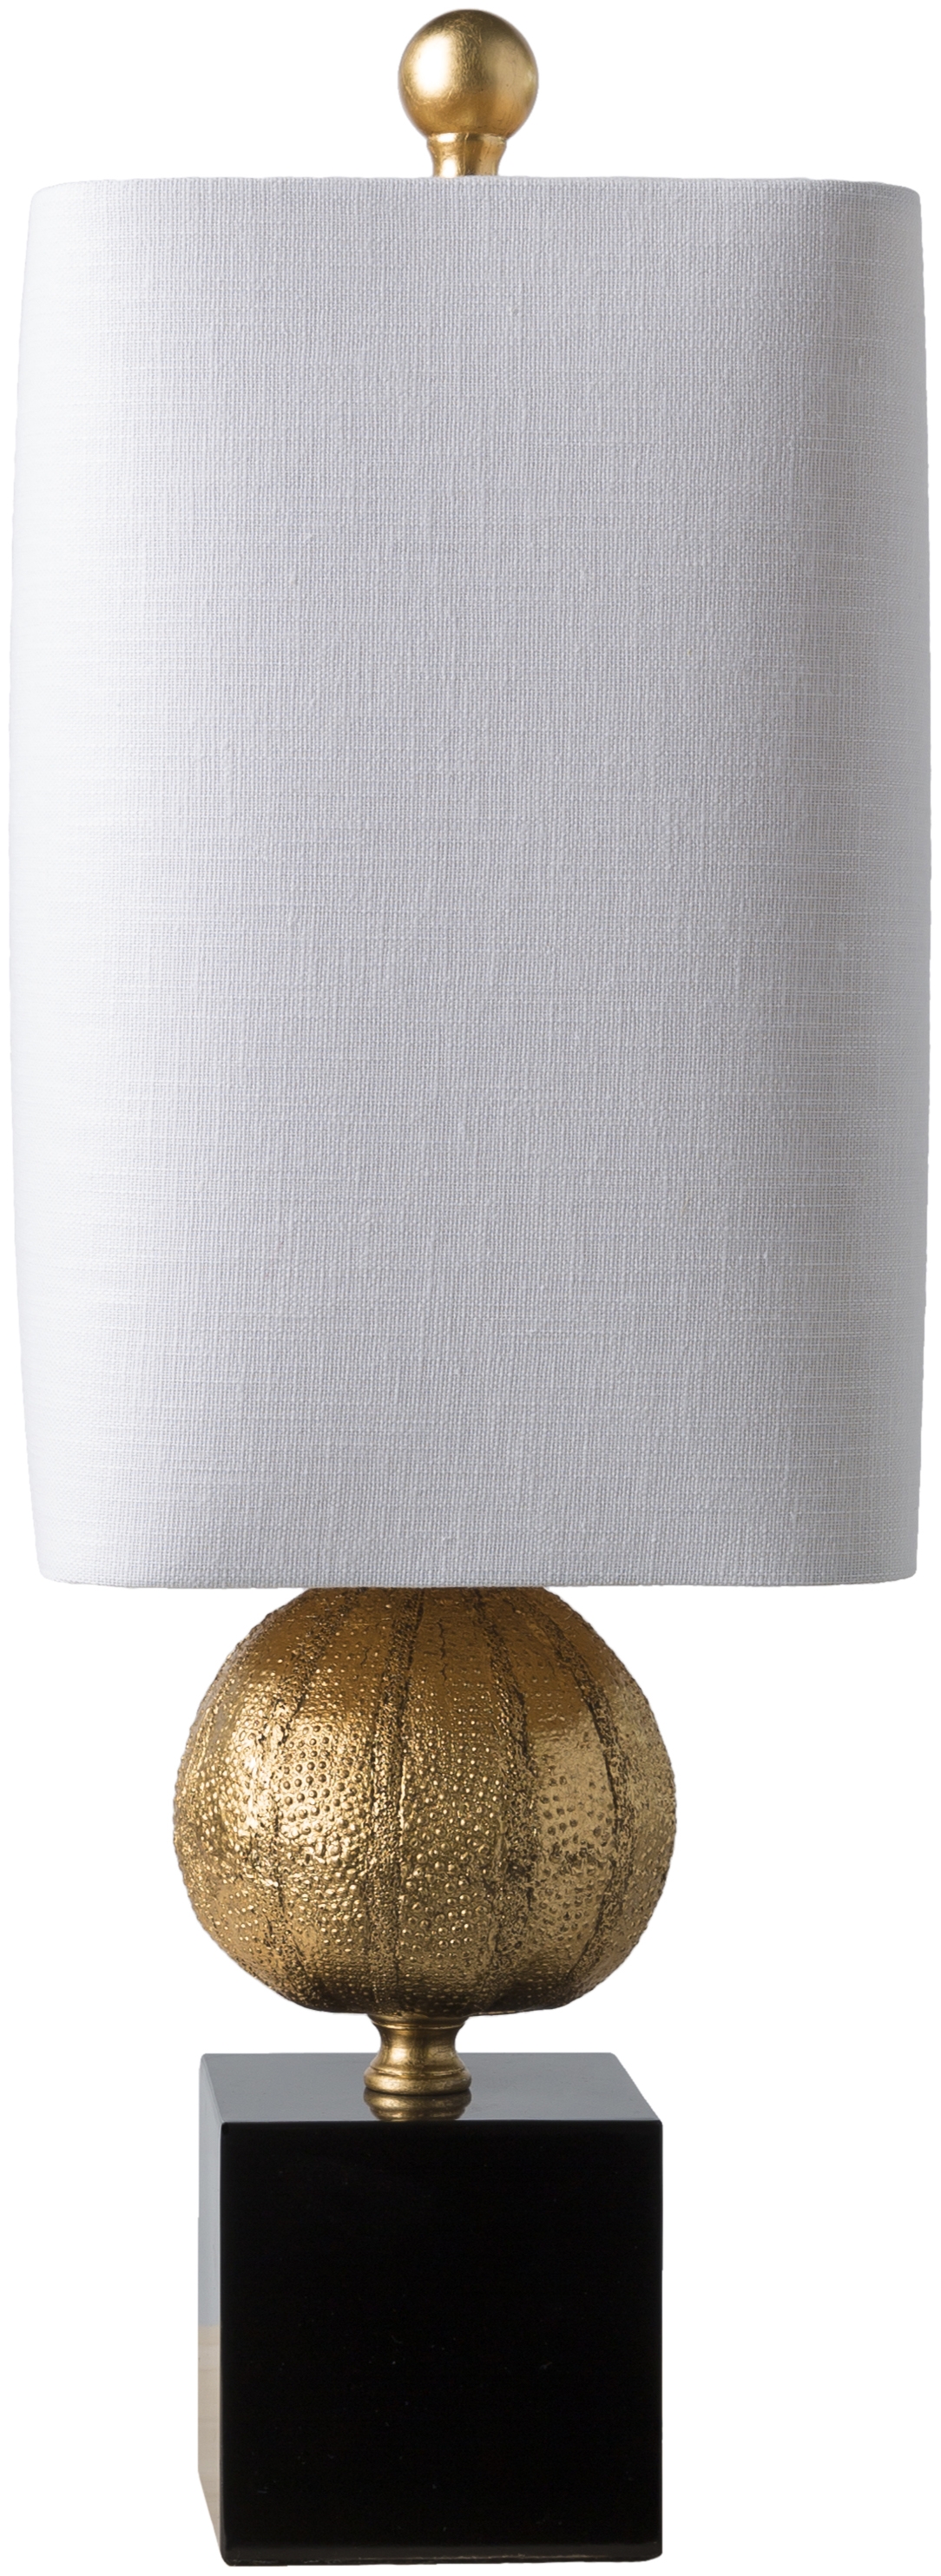 St. Martin Table Lamp - Image 0